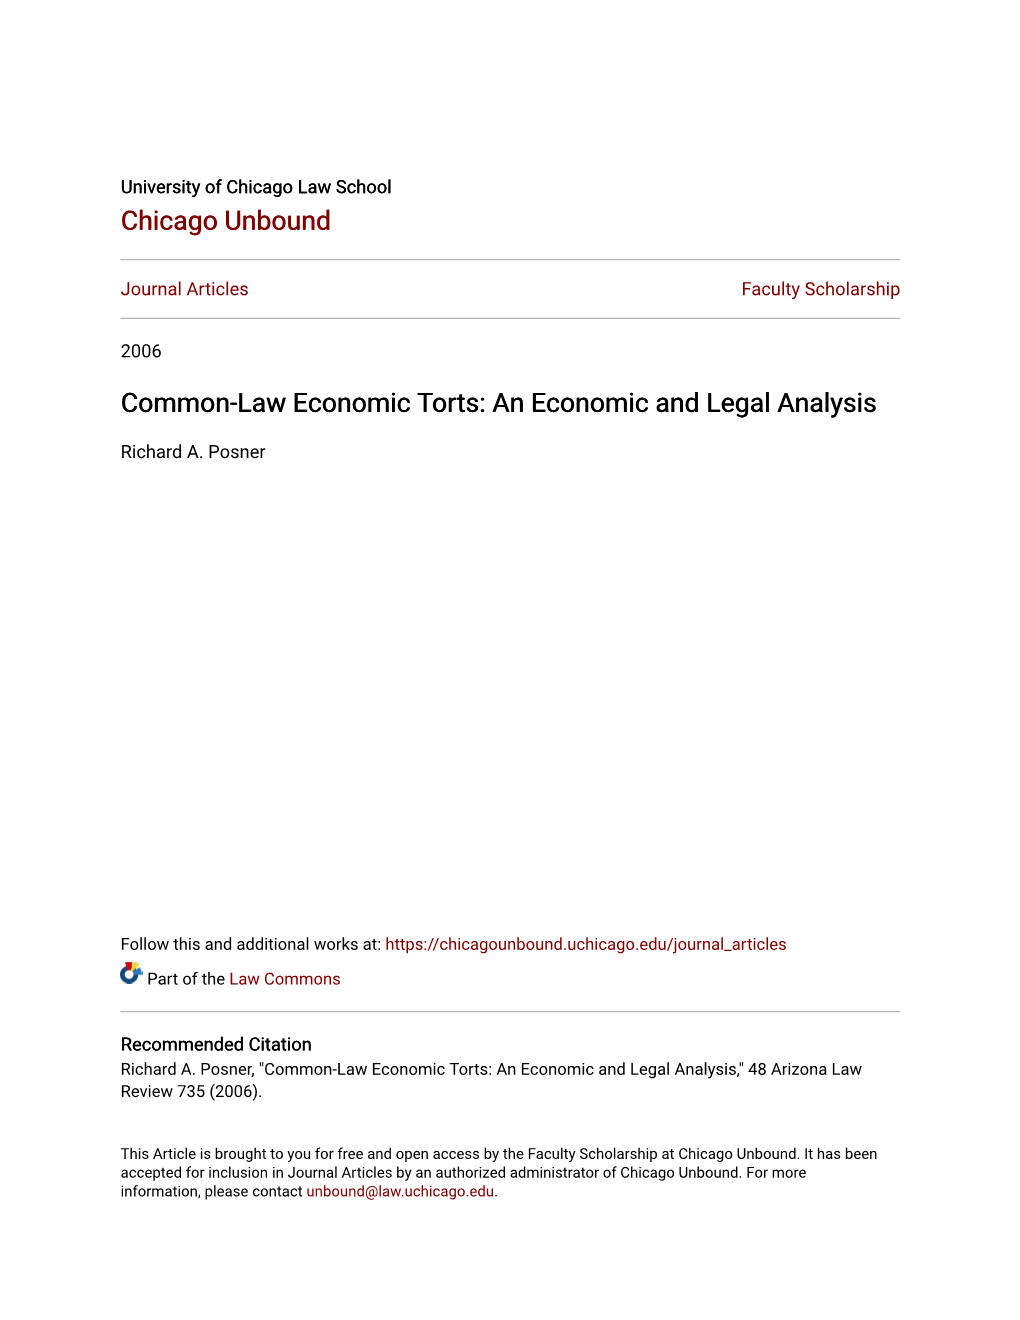 Common-Law Economic Torts: an Economic and Legal Analysis